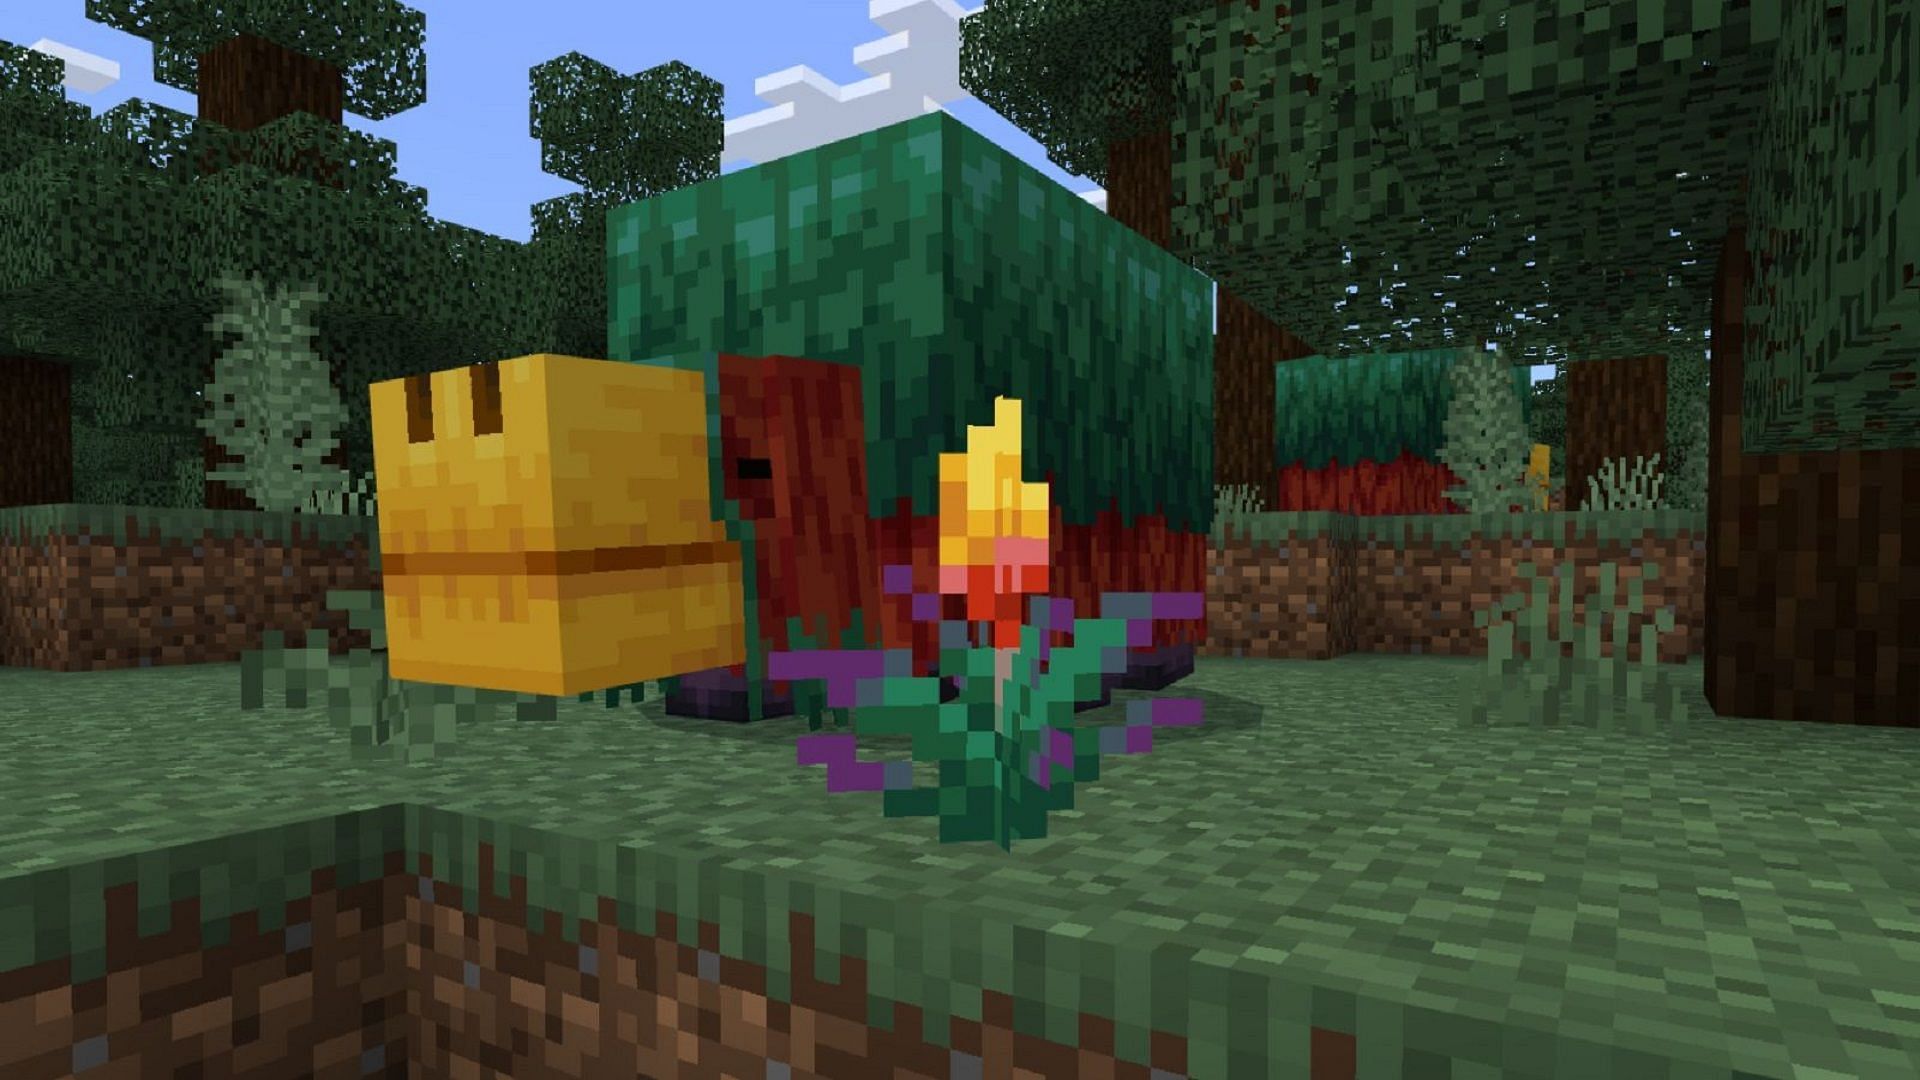 A sniffer strides past a torchflower in Minecraft (Image via Mojang)